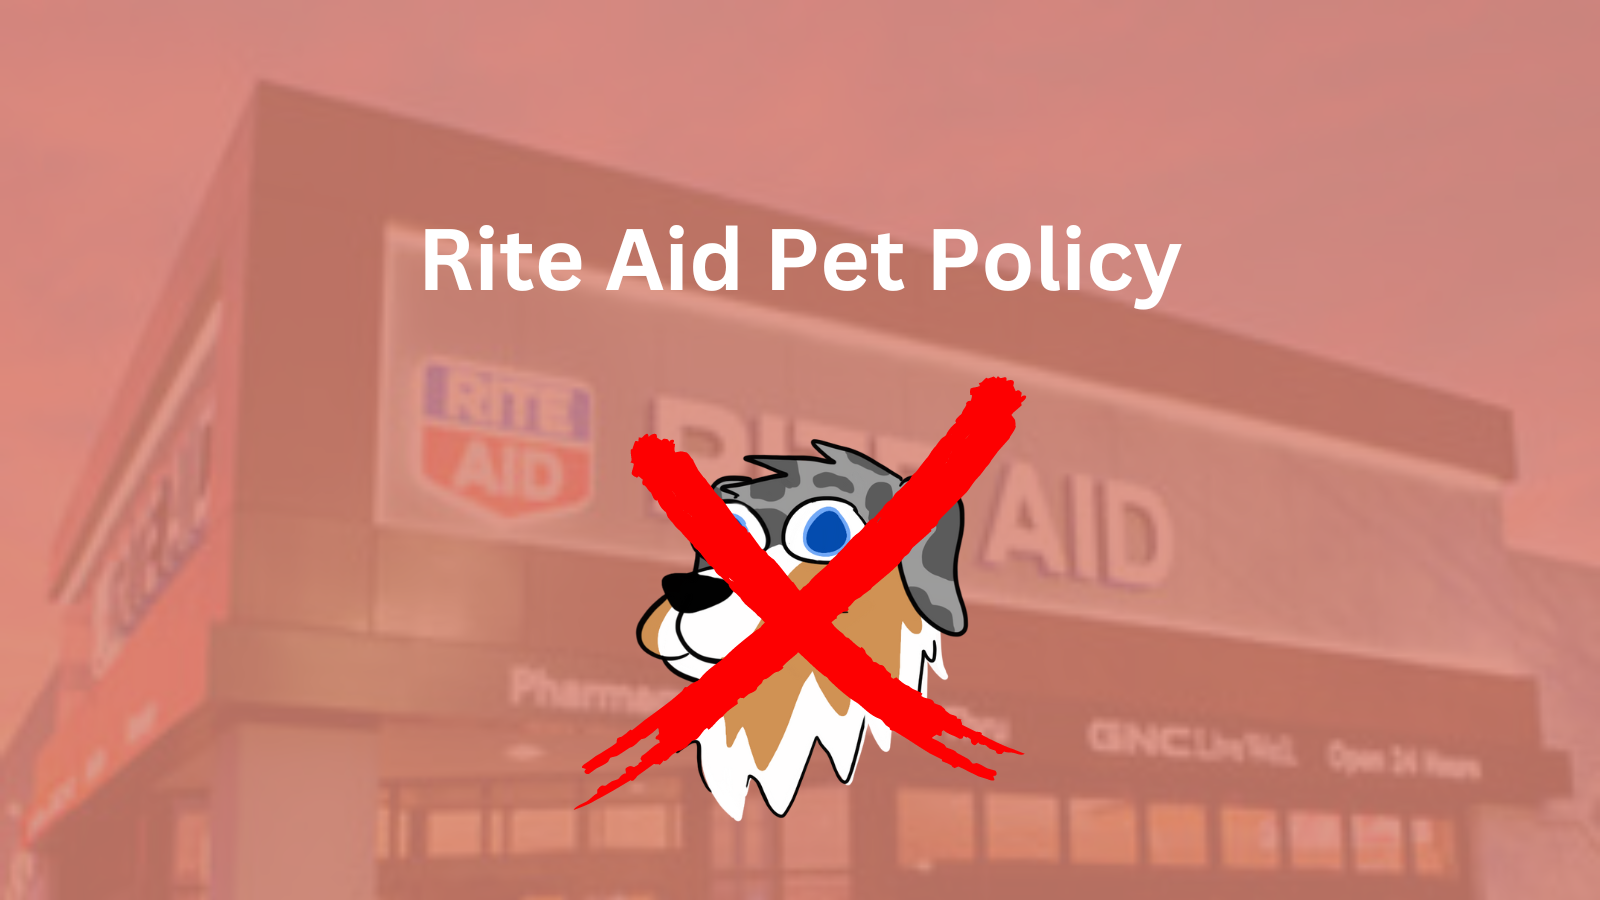 Image Text: "Rite Aid Pet Policy"